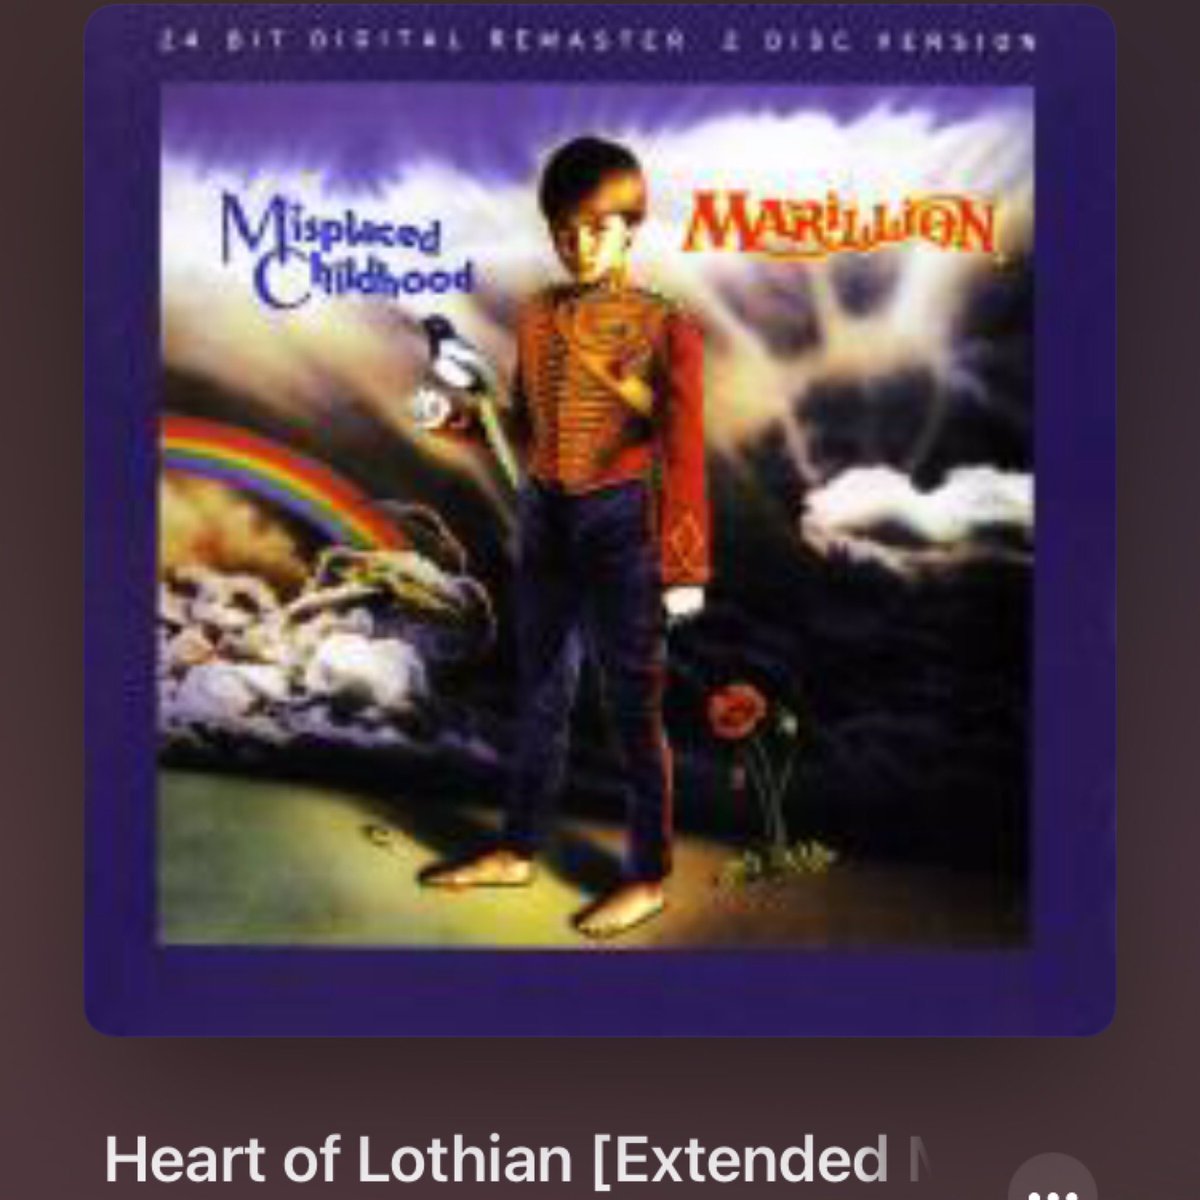 #NowPlaying
🎵 Heart of Lothian [Extended Mix]
by 🎵 Marillion
from 🎵 Misplaced Childhood [Bonus CD] Disc 2
#DerekWilliamDick #IanMosley #MarkKelly #PeteTrewavas #SteveRothery #80s #pomprock #remix #過ち色の記憶